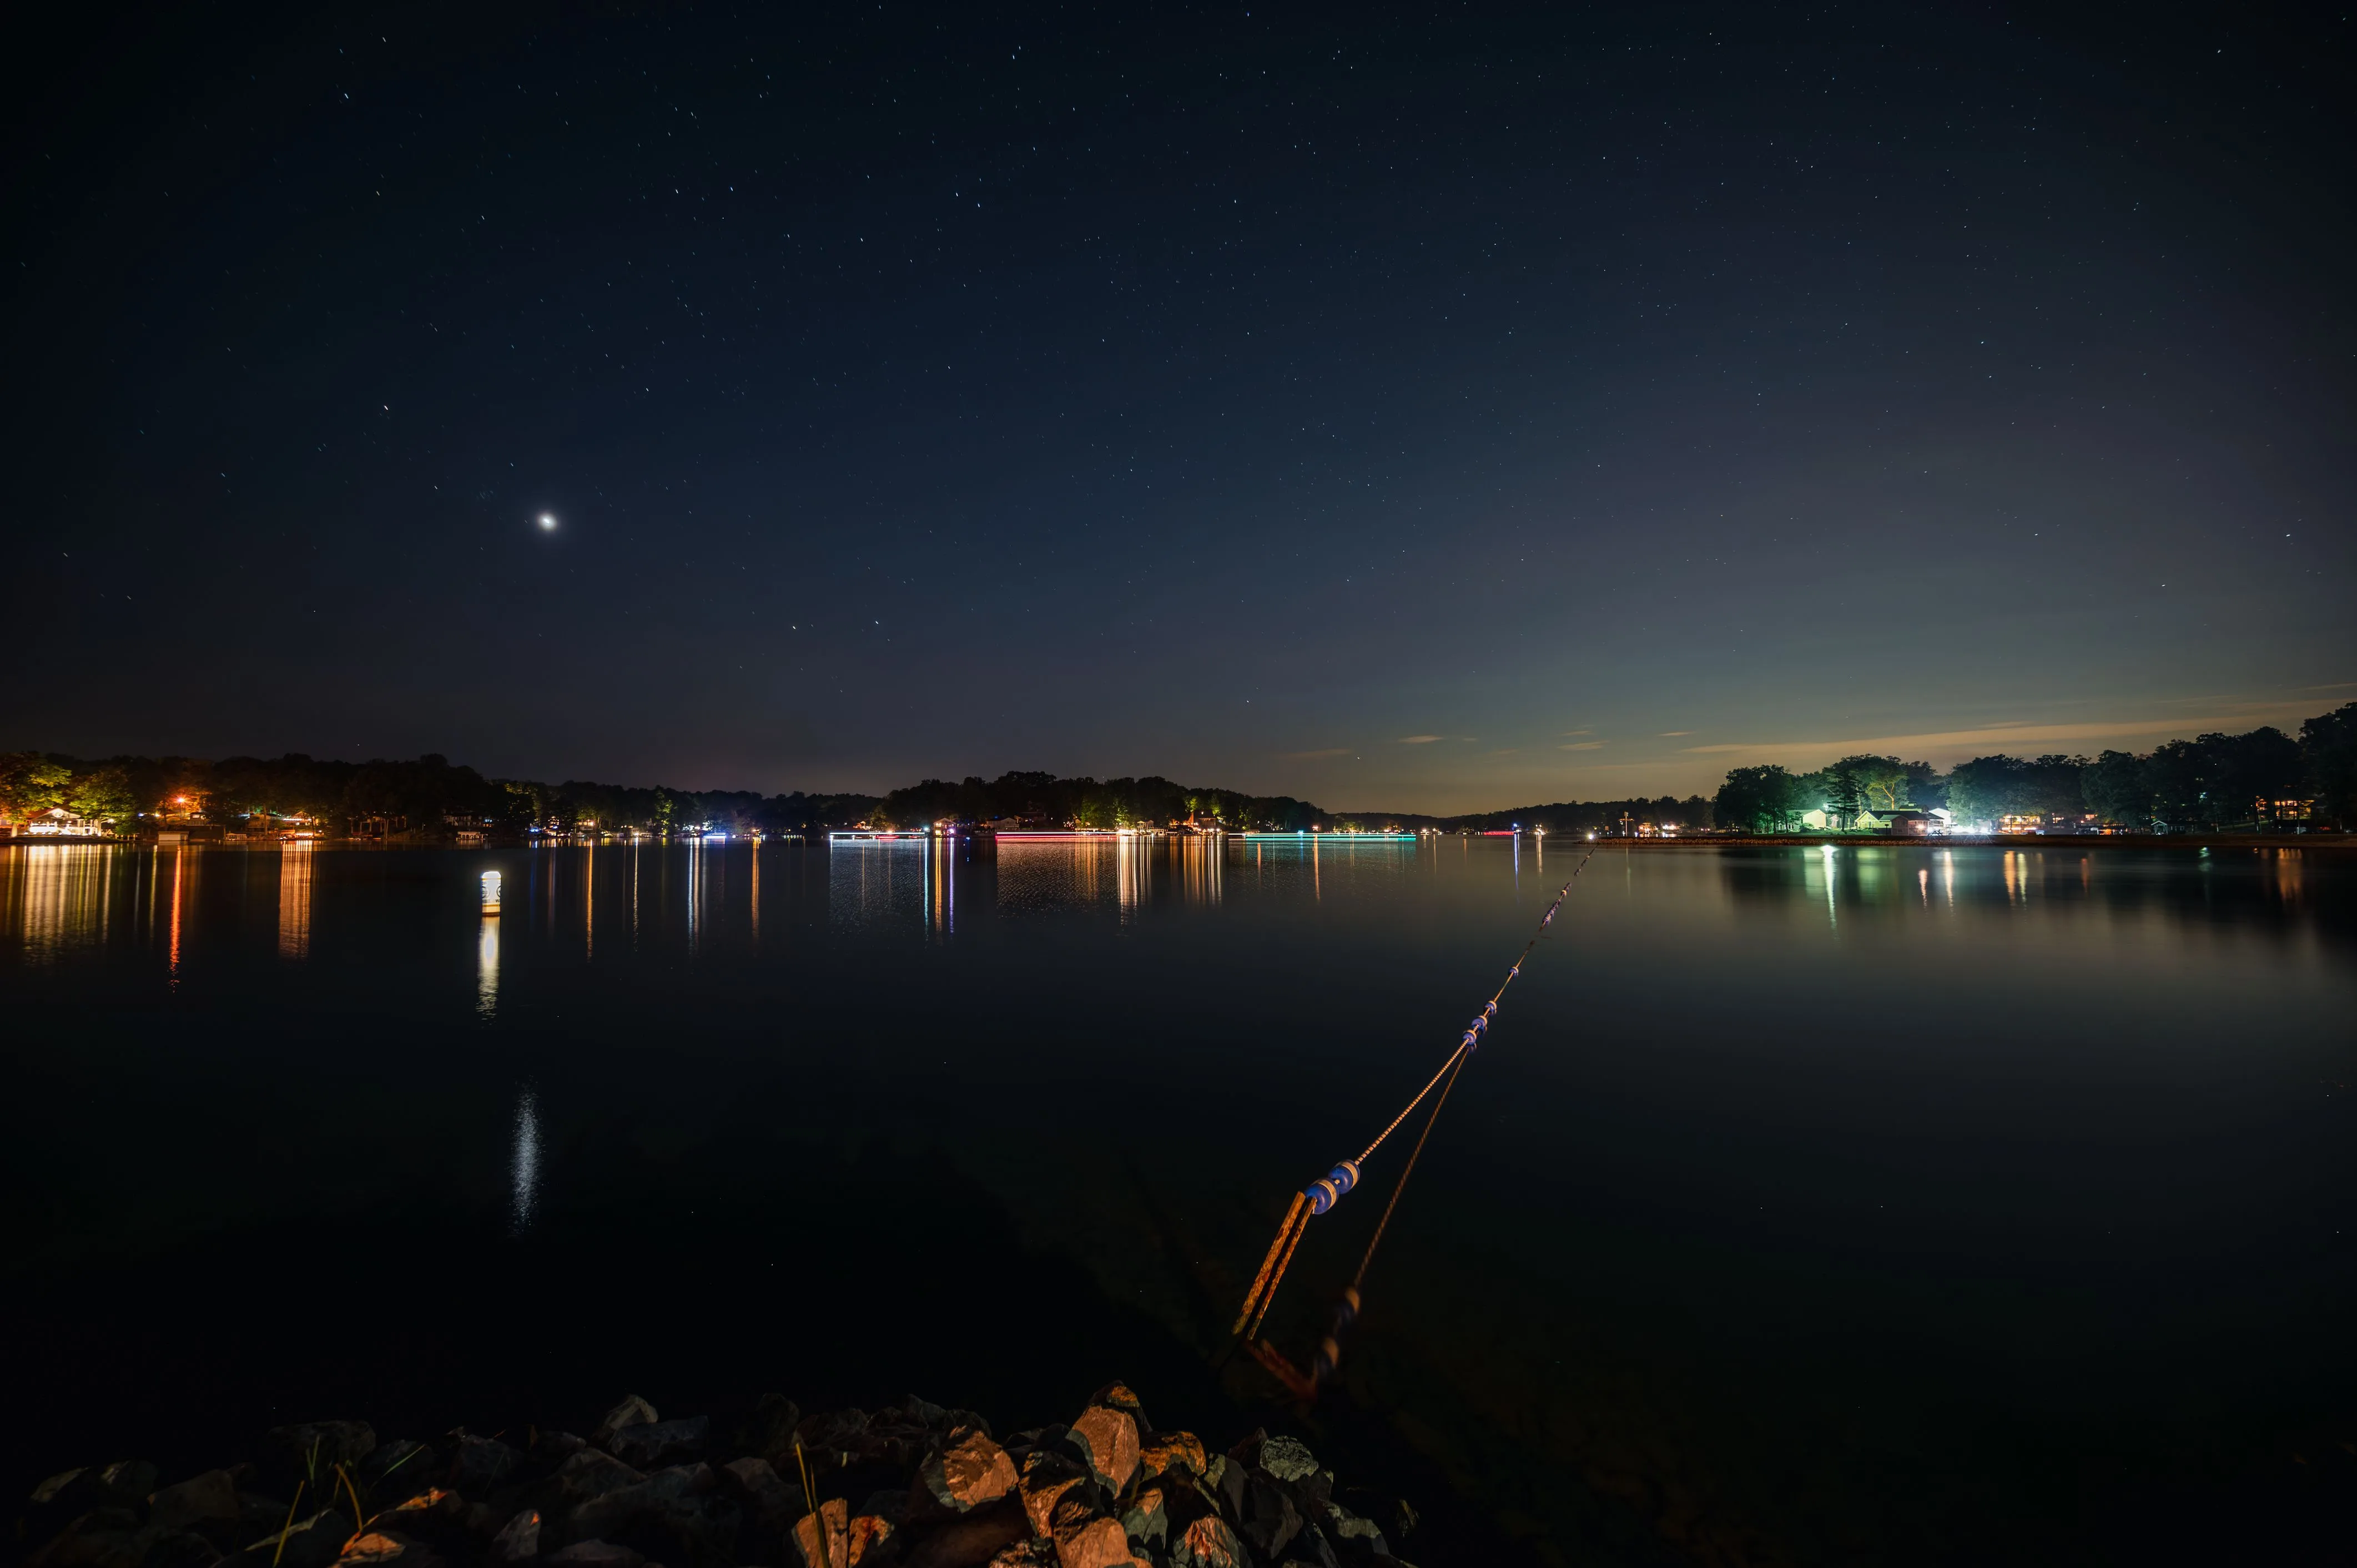 Nighttime view of a calm river reflecting lights from the opposite shore under a starry sky.